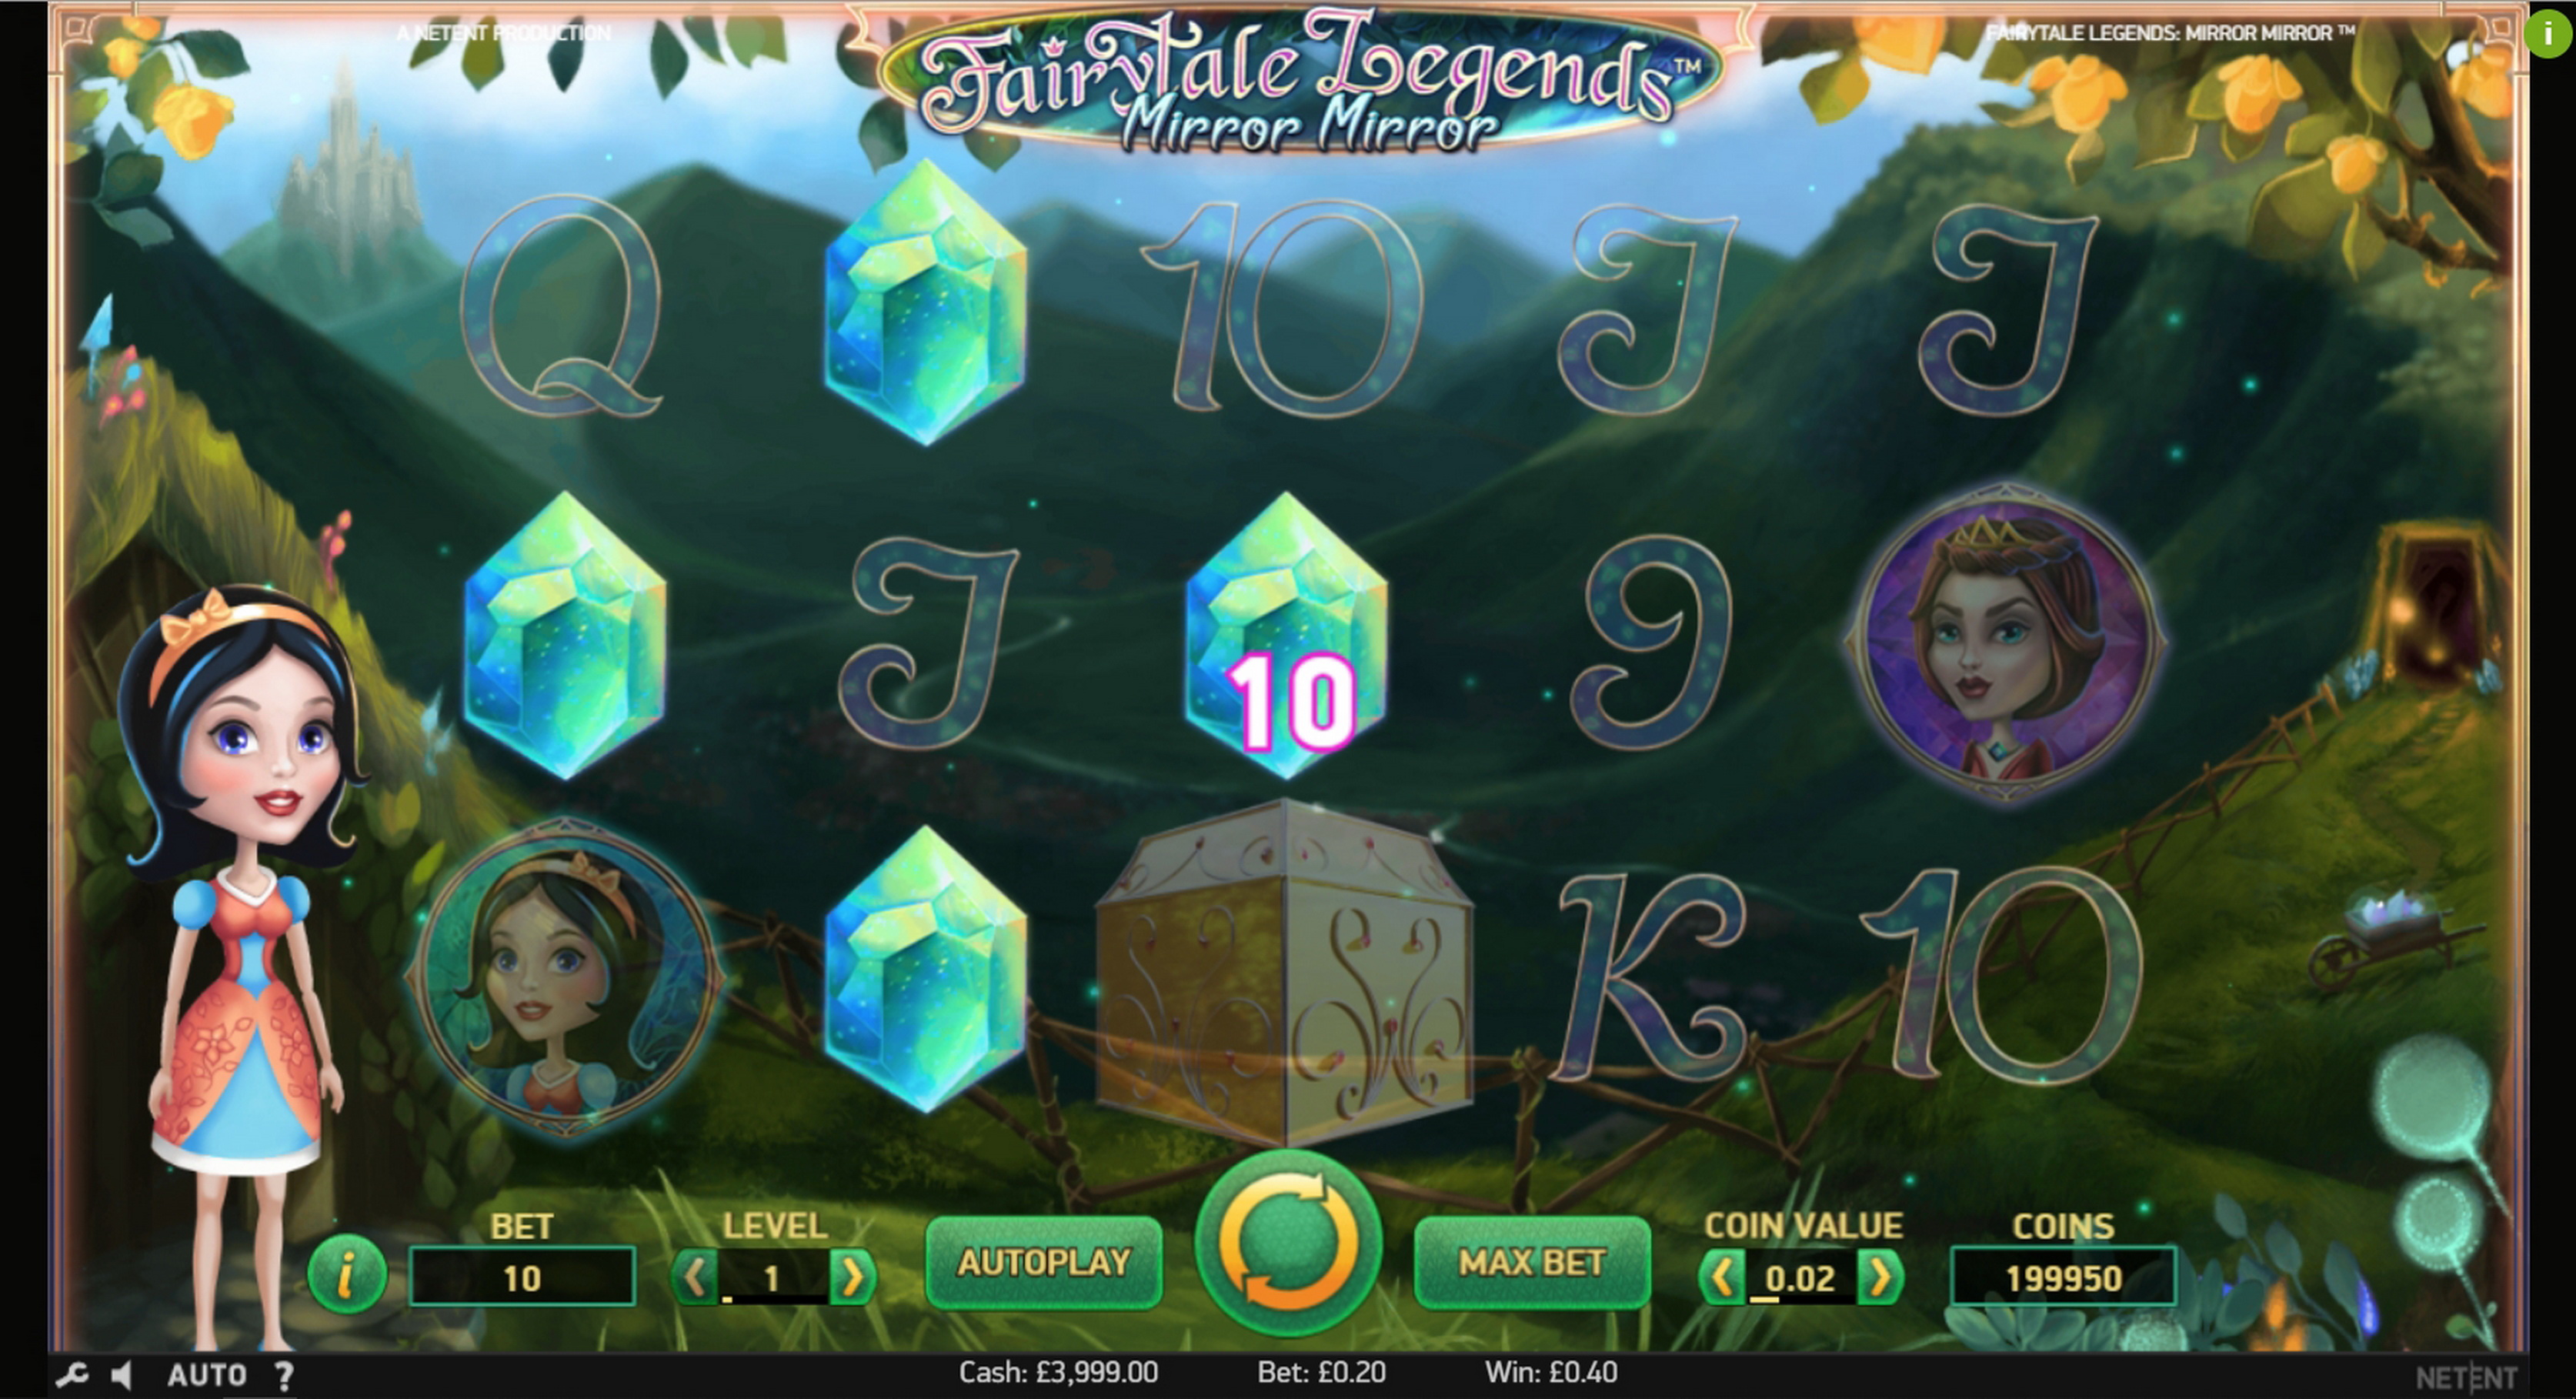 Win Money in Fairytale Legends: Mirror Mirror Free Slot Game by NetEnt